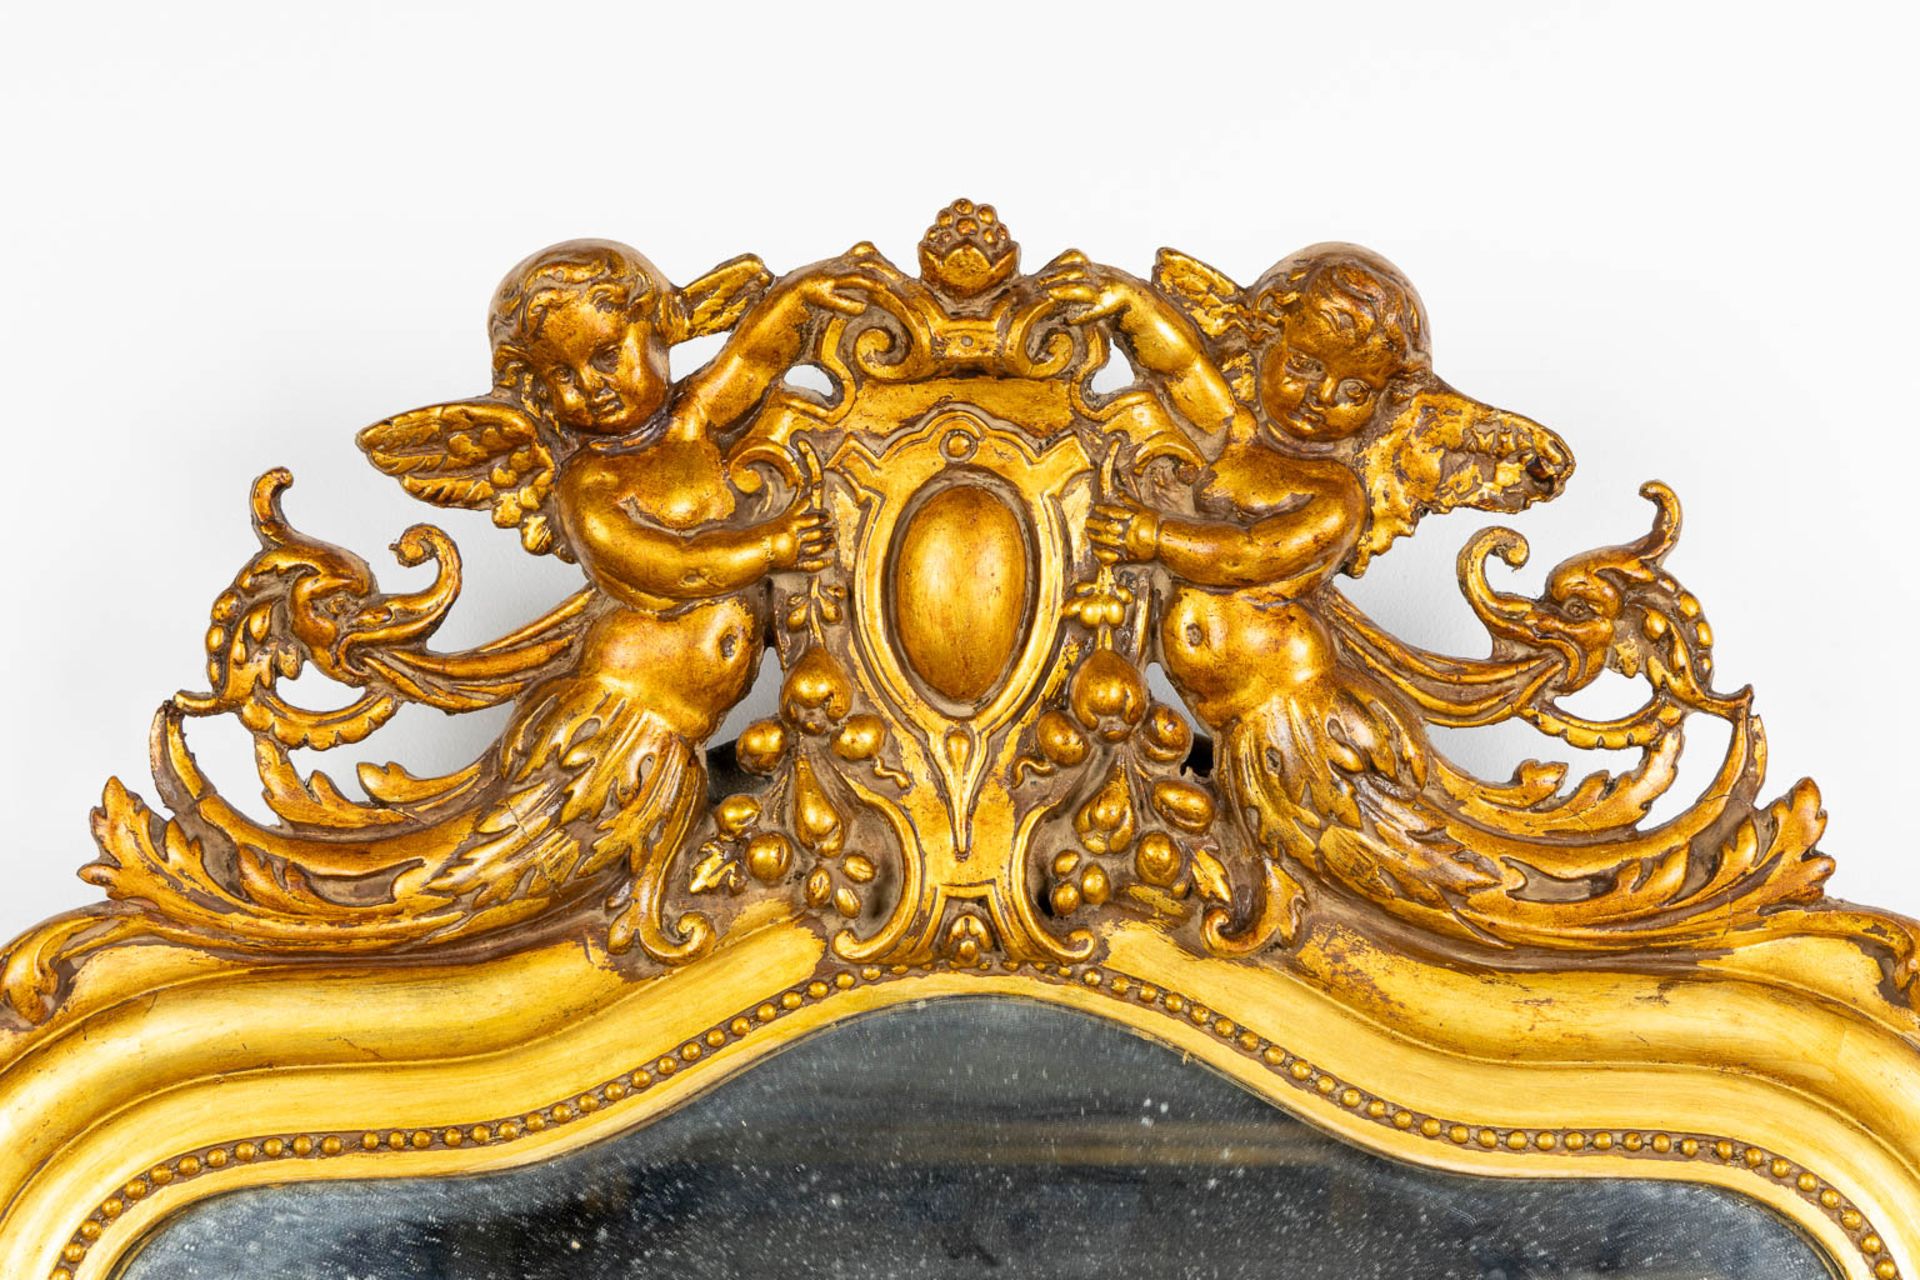 An antique mirror, gilt wood and stucco. Circa 1900. (W:82 x H:122 cm) - Image 3 of 11